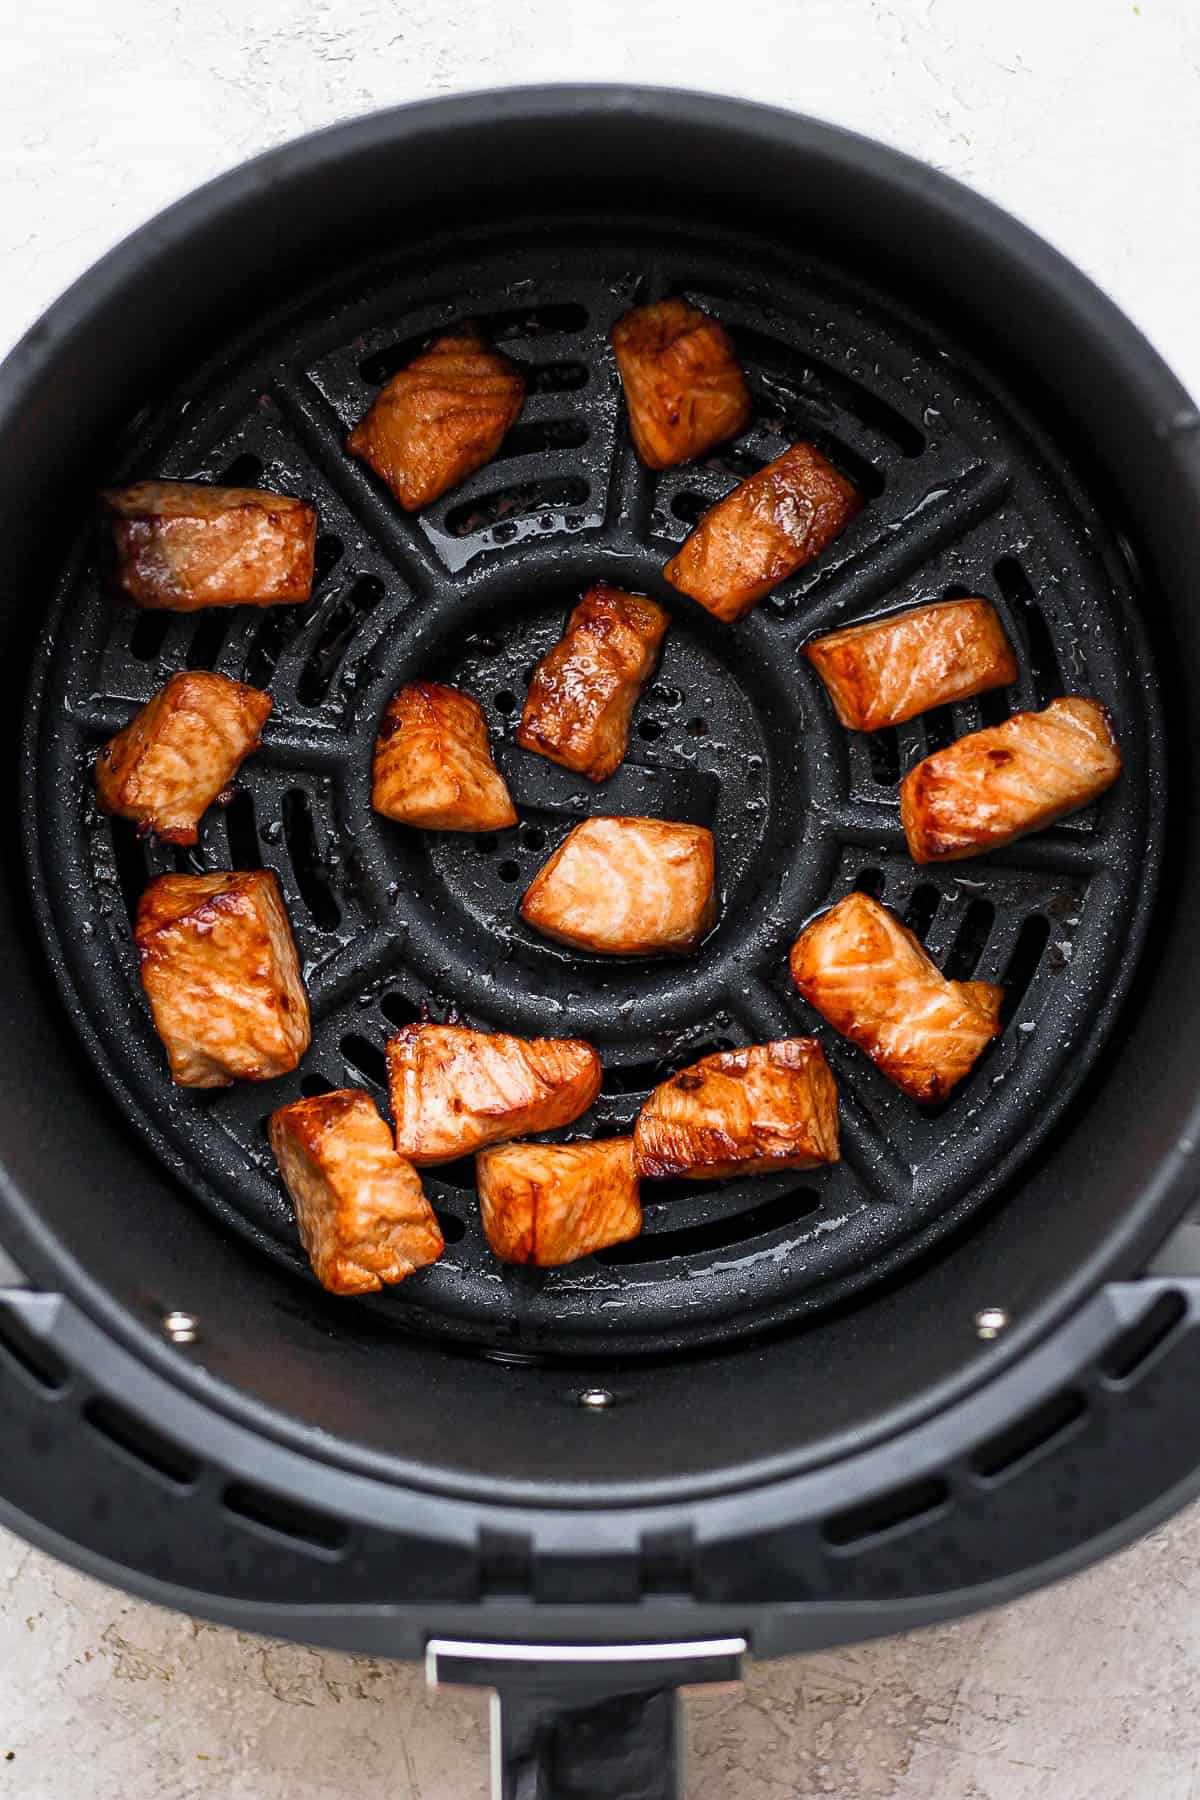 Salmon bites in the air fryer basket after cooking.